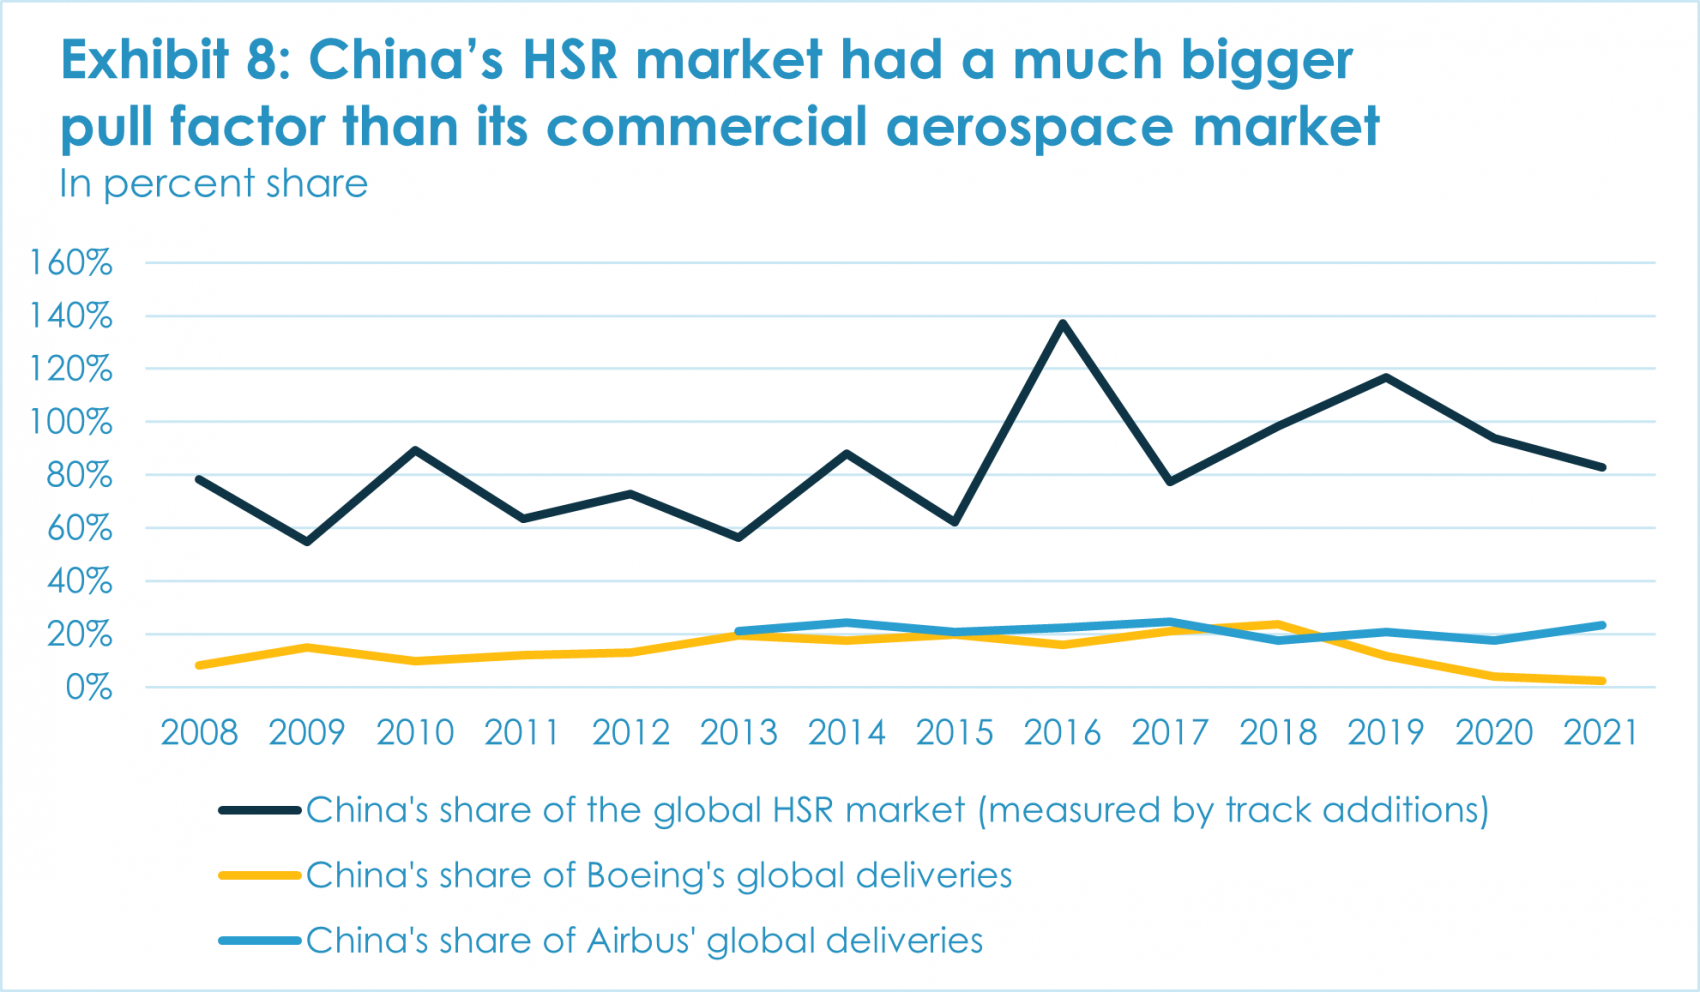 Exhibit 8: China’s HSR market had a much bigger pull factor than its commercial aerospace market